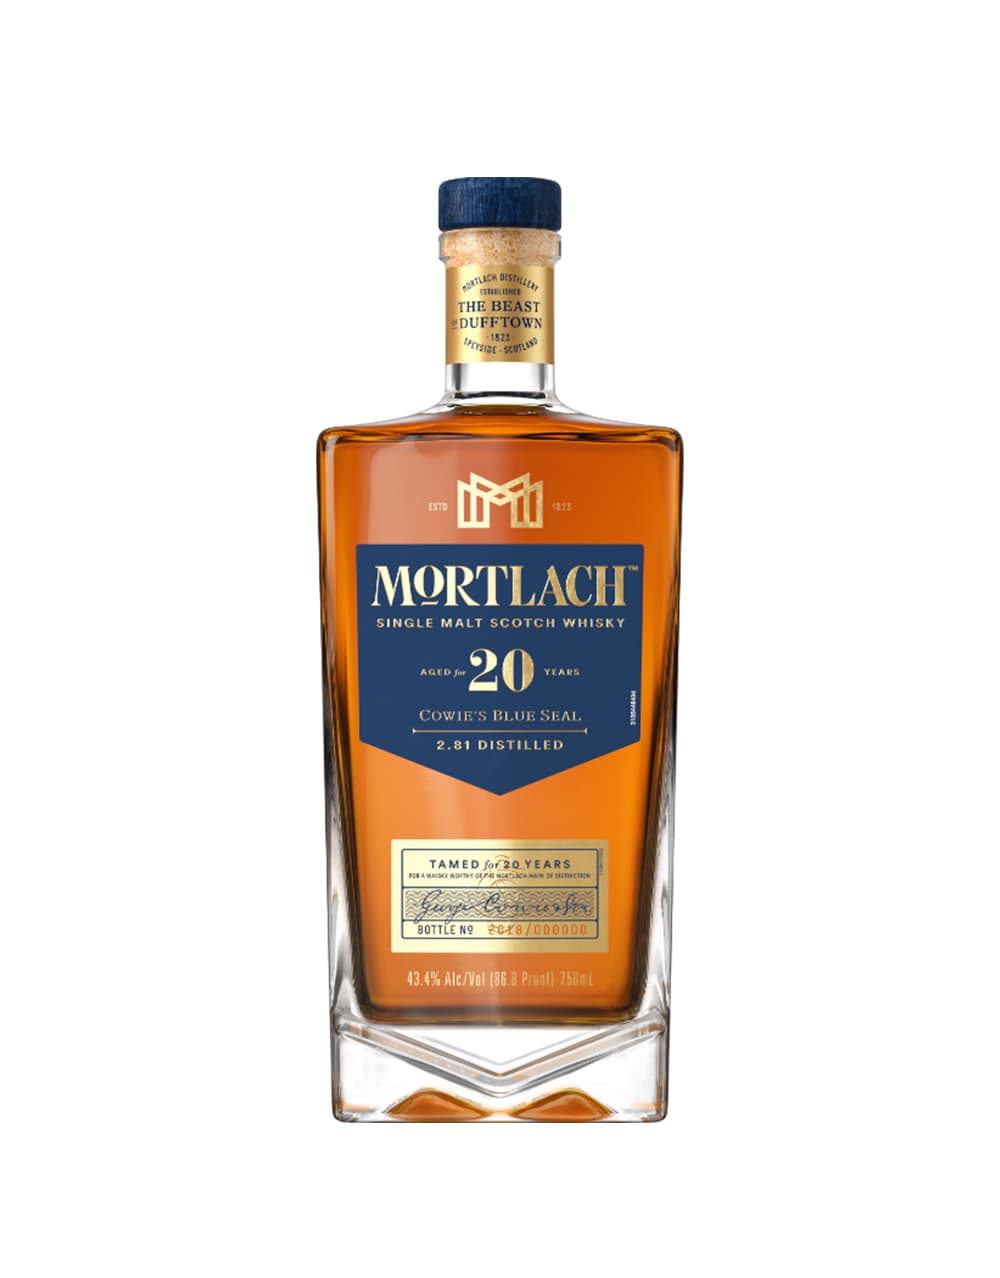 Mortlach 20 Year Old Scotch Whisky